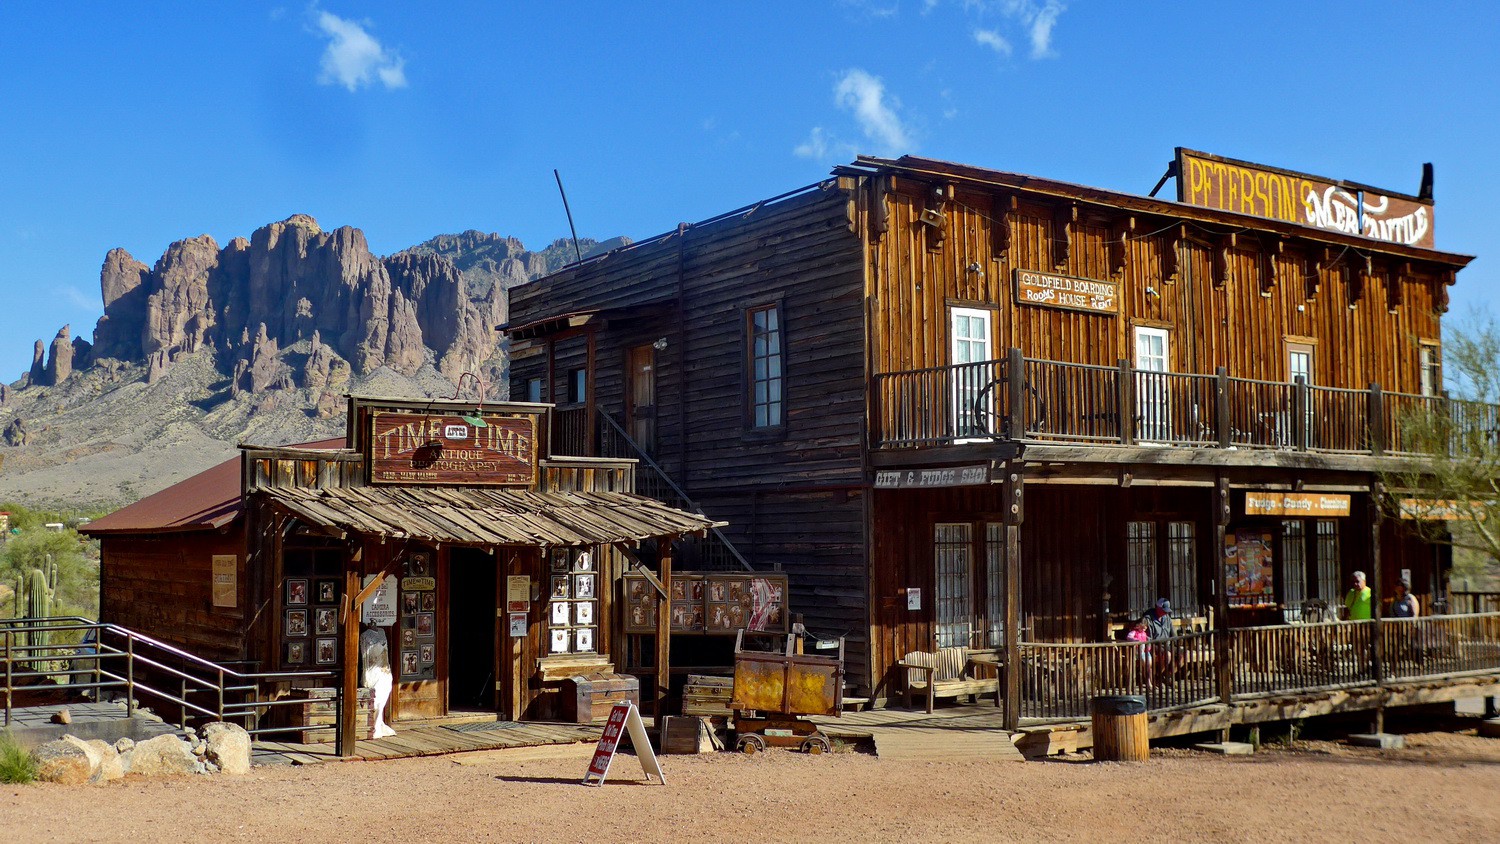 Buildings in the Goldfield Ghost Town with Superstition Mountains